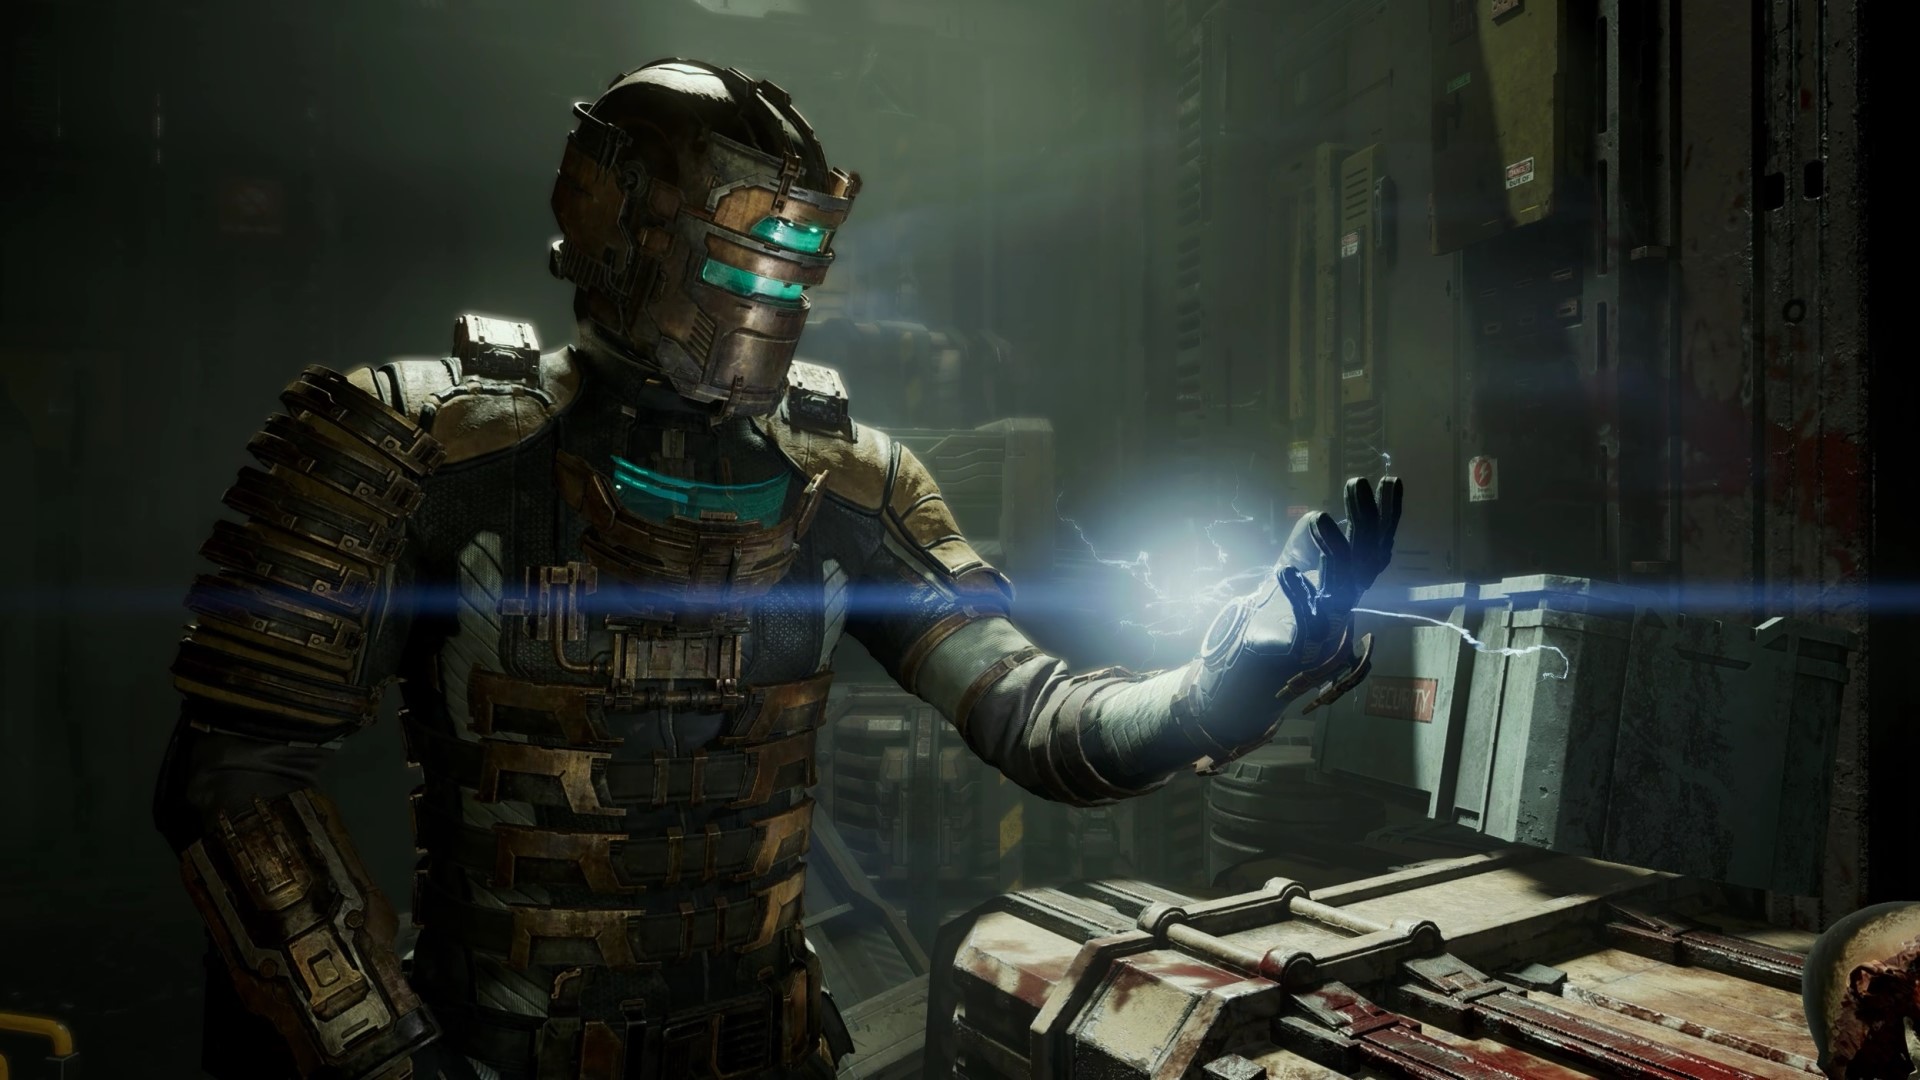 Dead Space Remake's Map Will be Presented in 2D, Unlike the Original